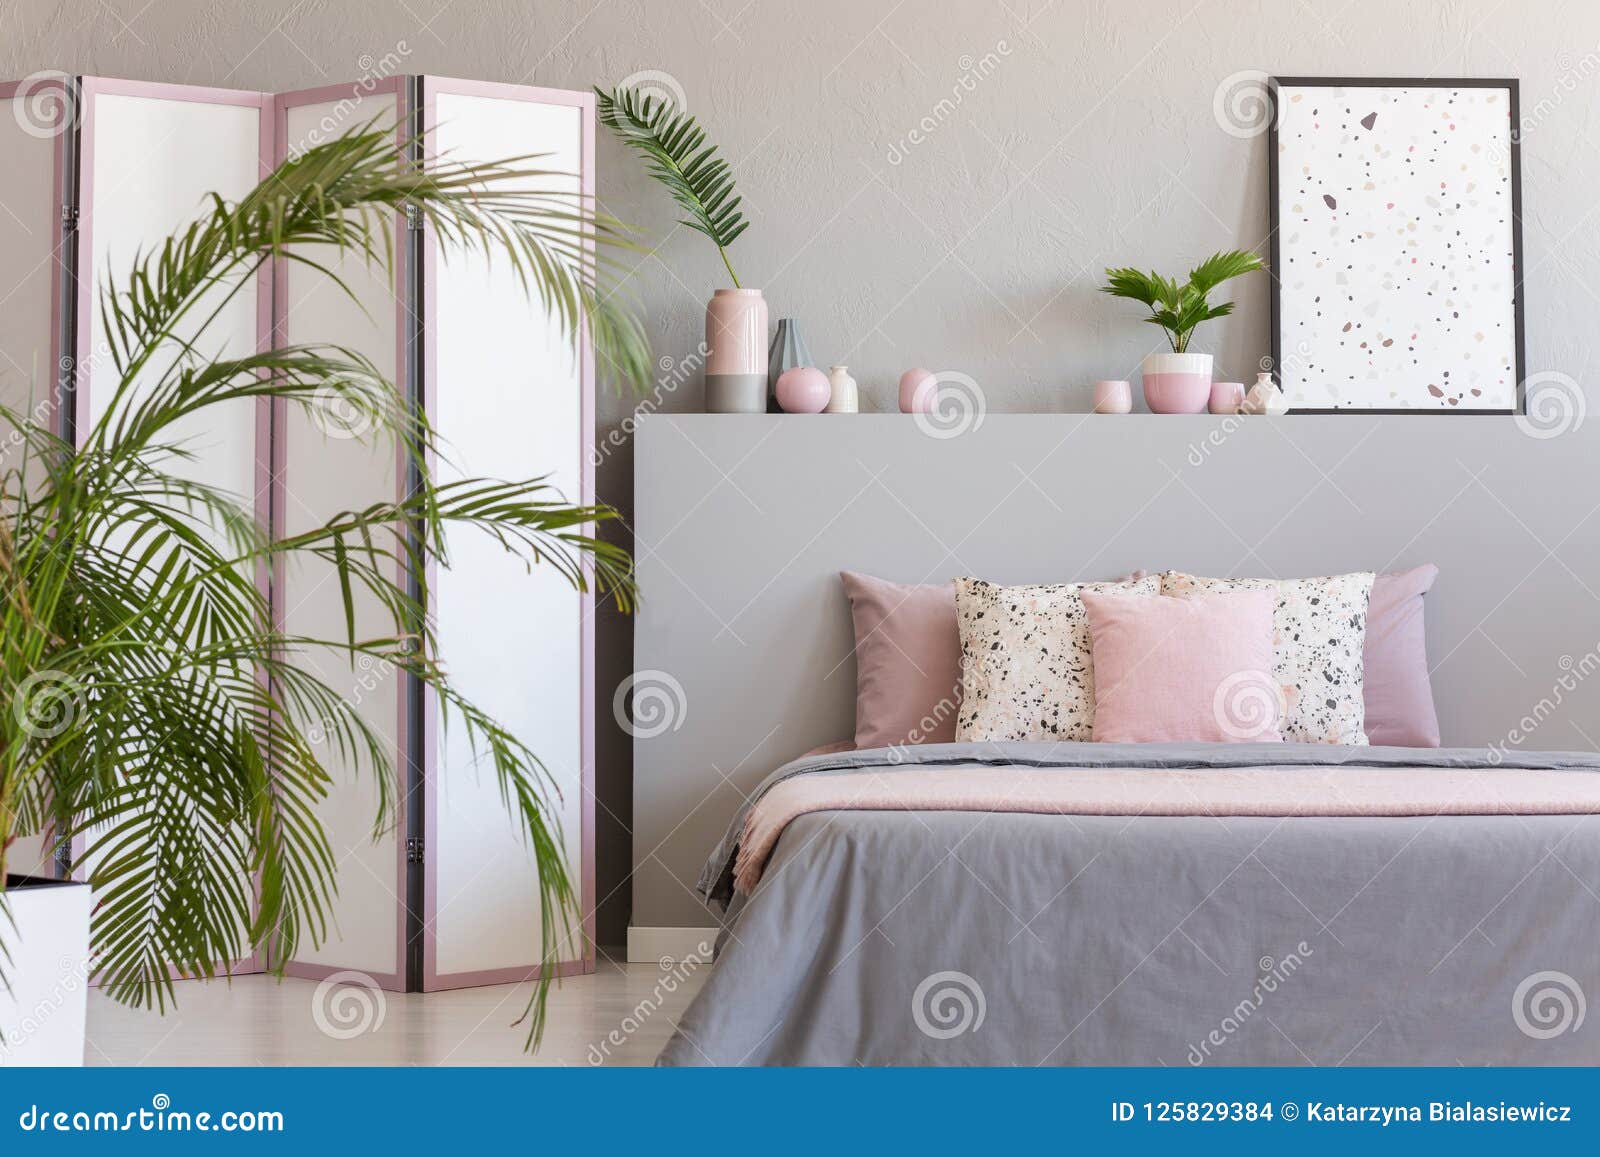 pink pillows on grey bed in pastel bedroom interior with palm and poster on bedhead. real photo